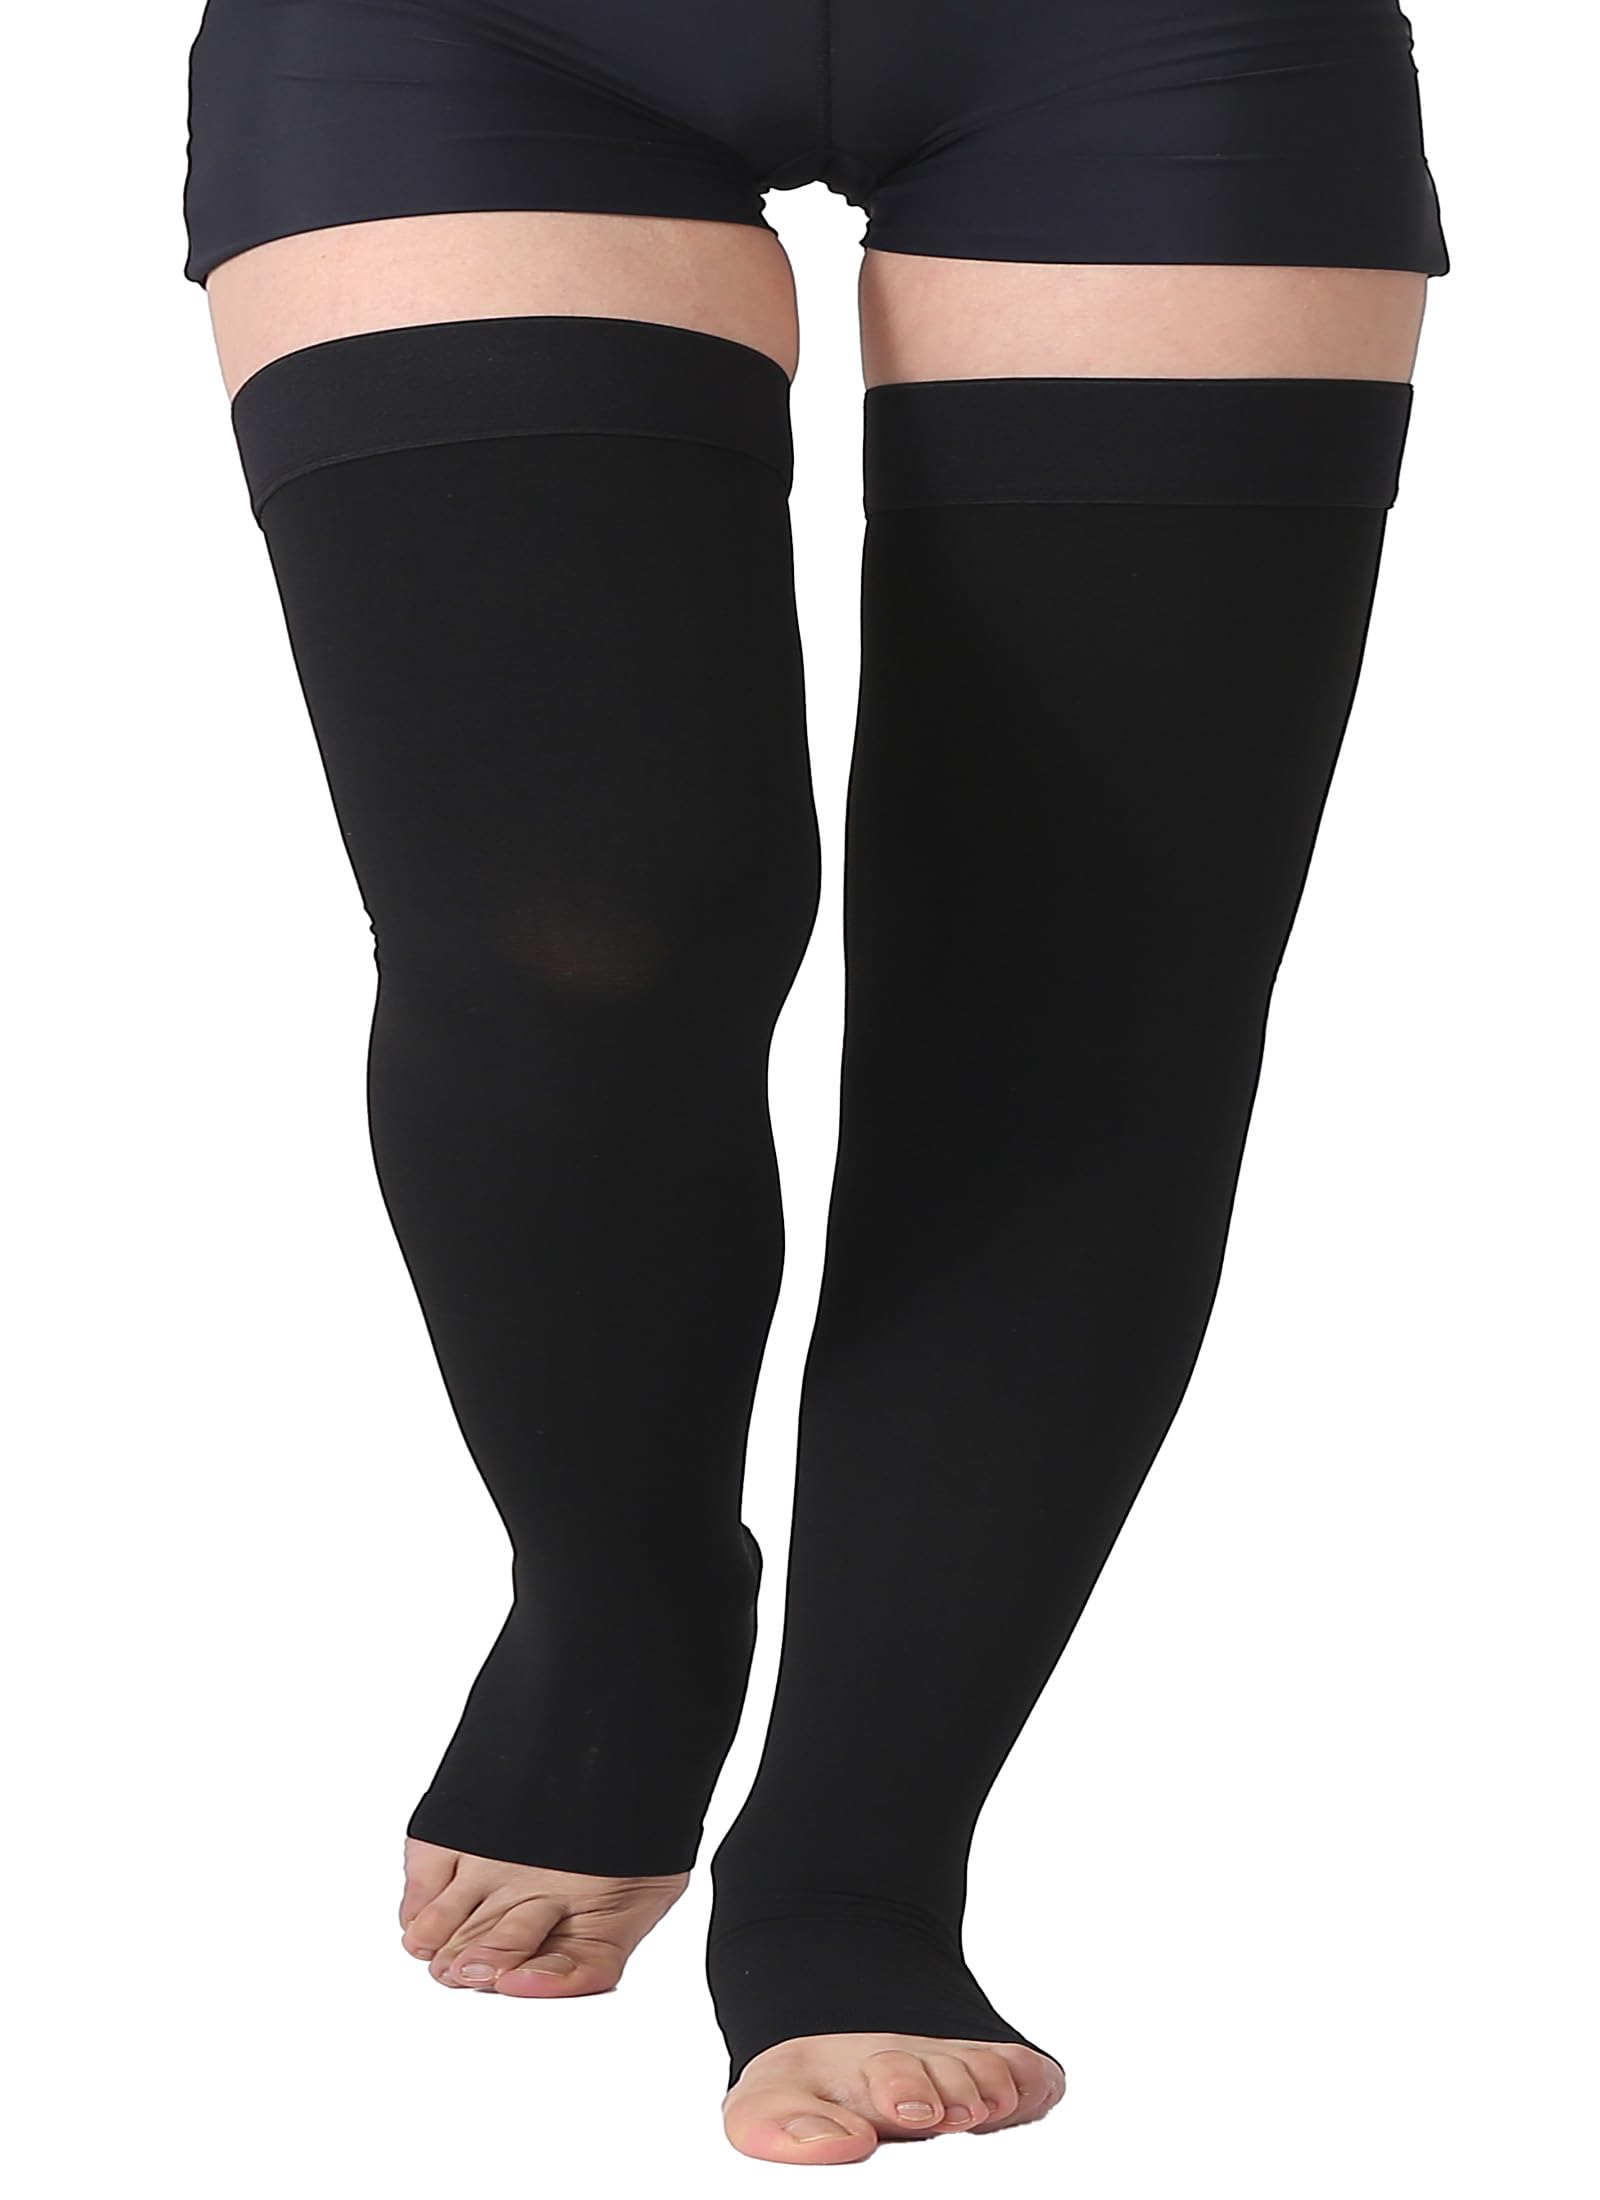 TOFLY Thigh High Compression Stockings for Women & Men (Pair) Open